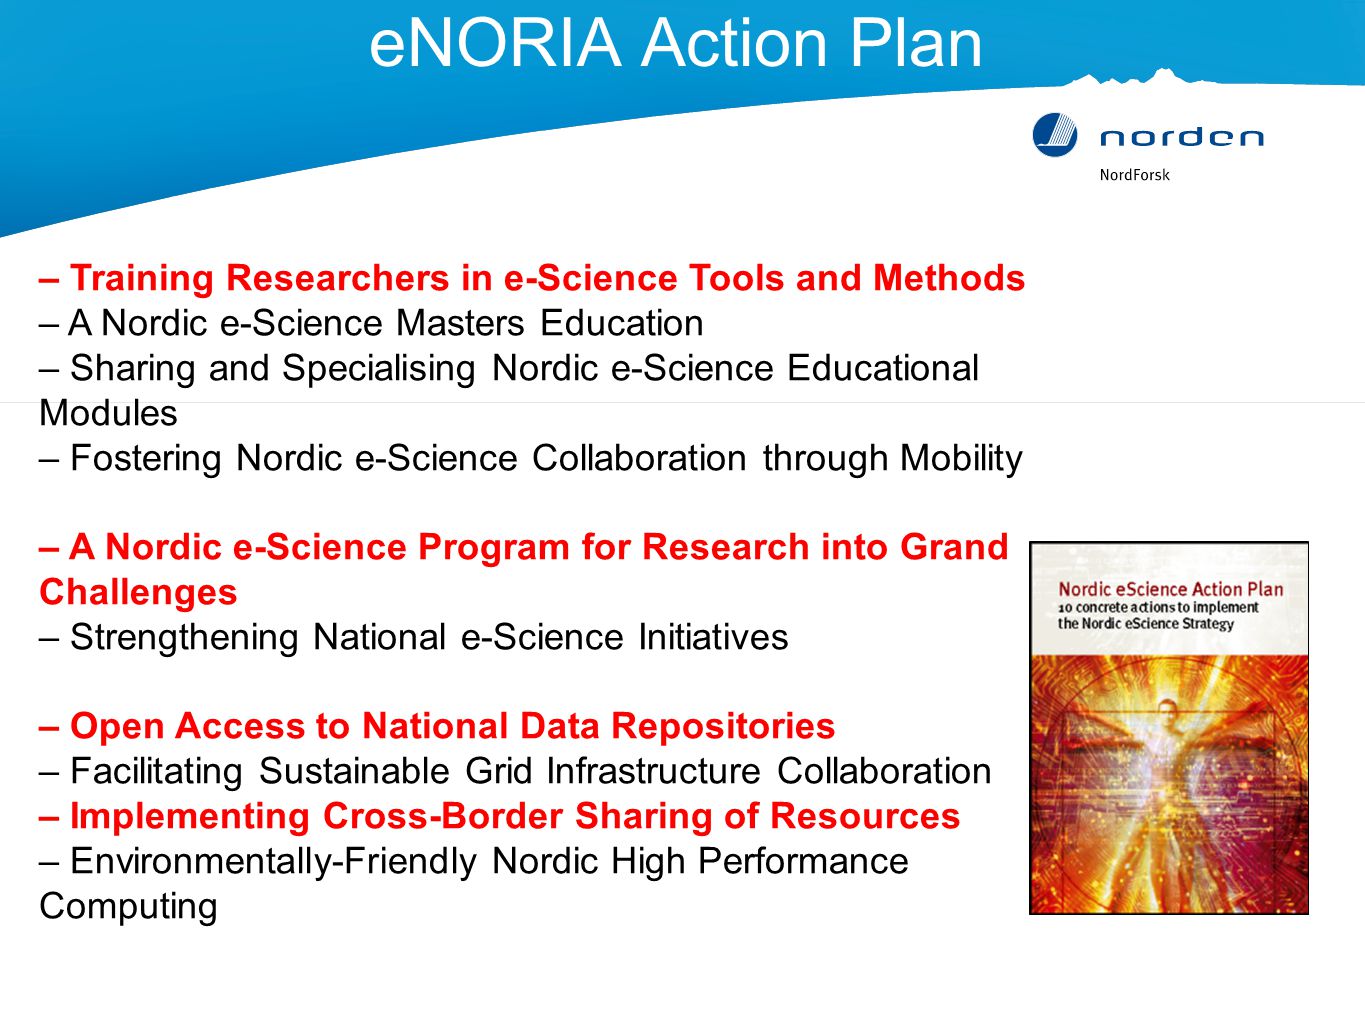 eNORIA Action Plan – Training Researchers in e-Science Tools and Methods – A Nordic e-Science Masters Education – Sharing and Specialising Nordic e-Science Educational Modules – Fostering Nordic e-Science Collaboration through Mobility – A Nordic e-Science Program for Research into Grand Challenges – Strengthening National e-Science Initiatives – Open Access to National Data Repositories – Facilitating Sustainable Grid Infrastructure Collaboration – Implementing Cross-Border Sharing of Resources – Environmentally-Friendly Nordic High Performance Computing